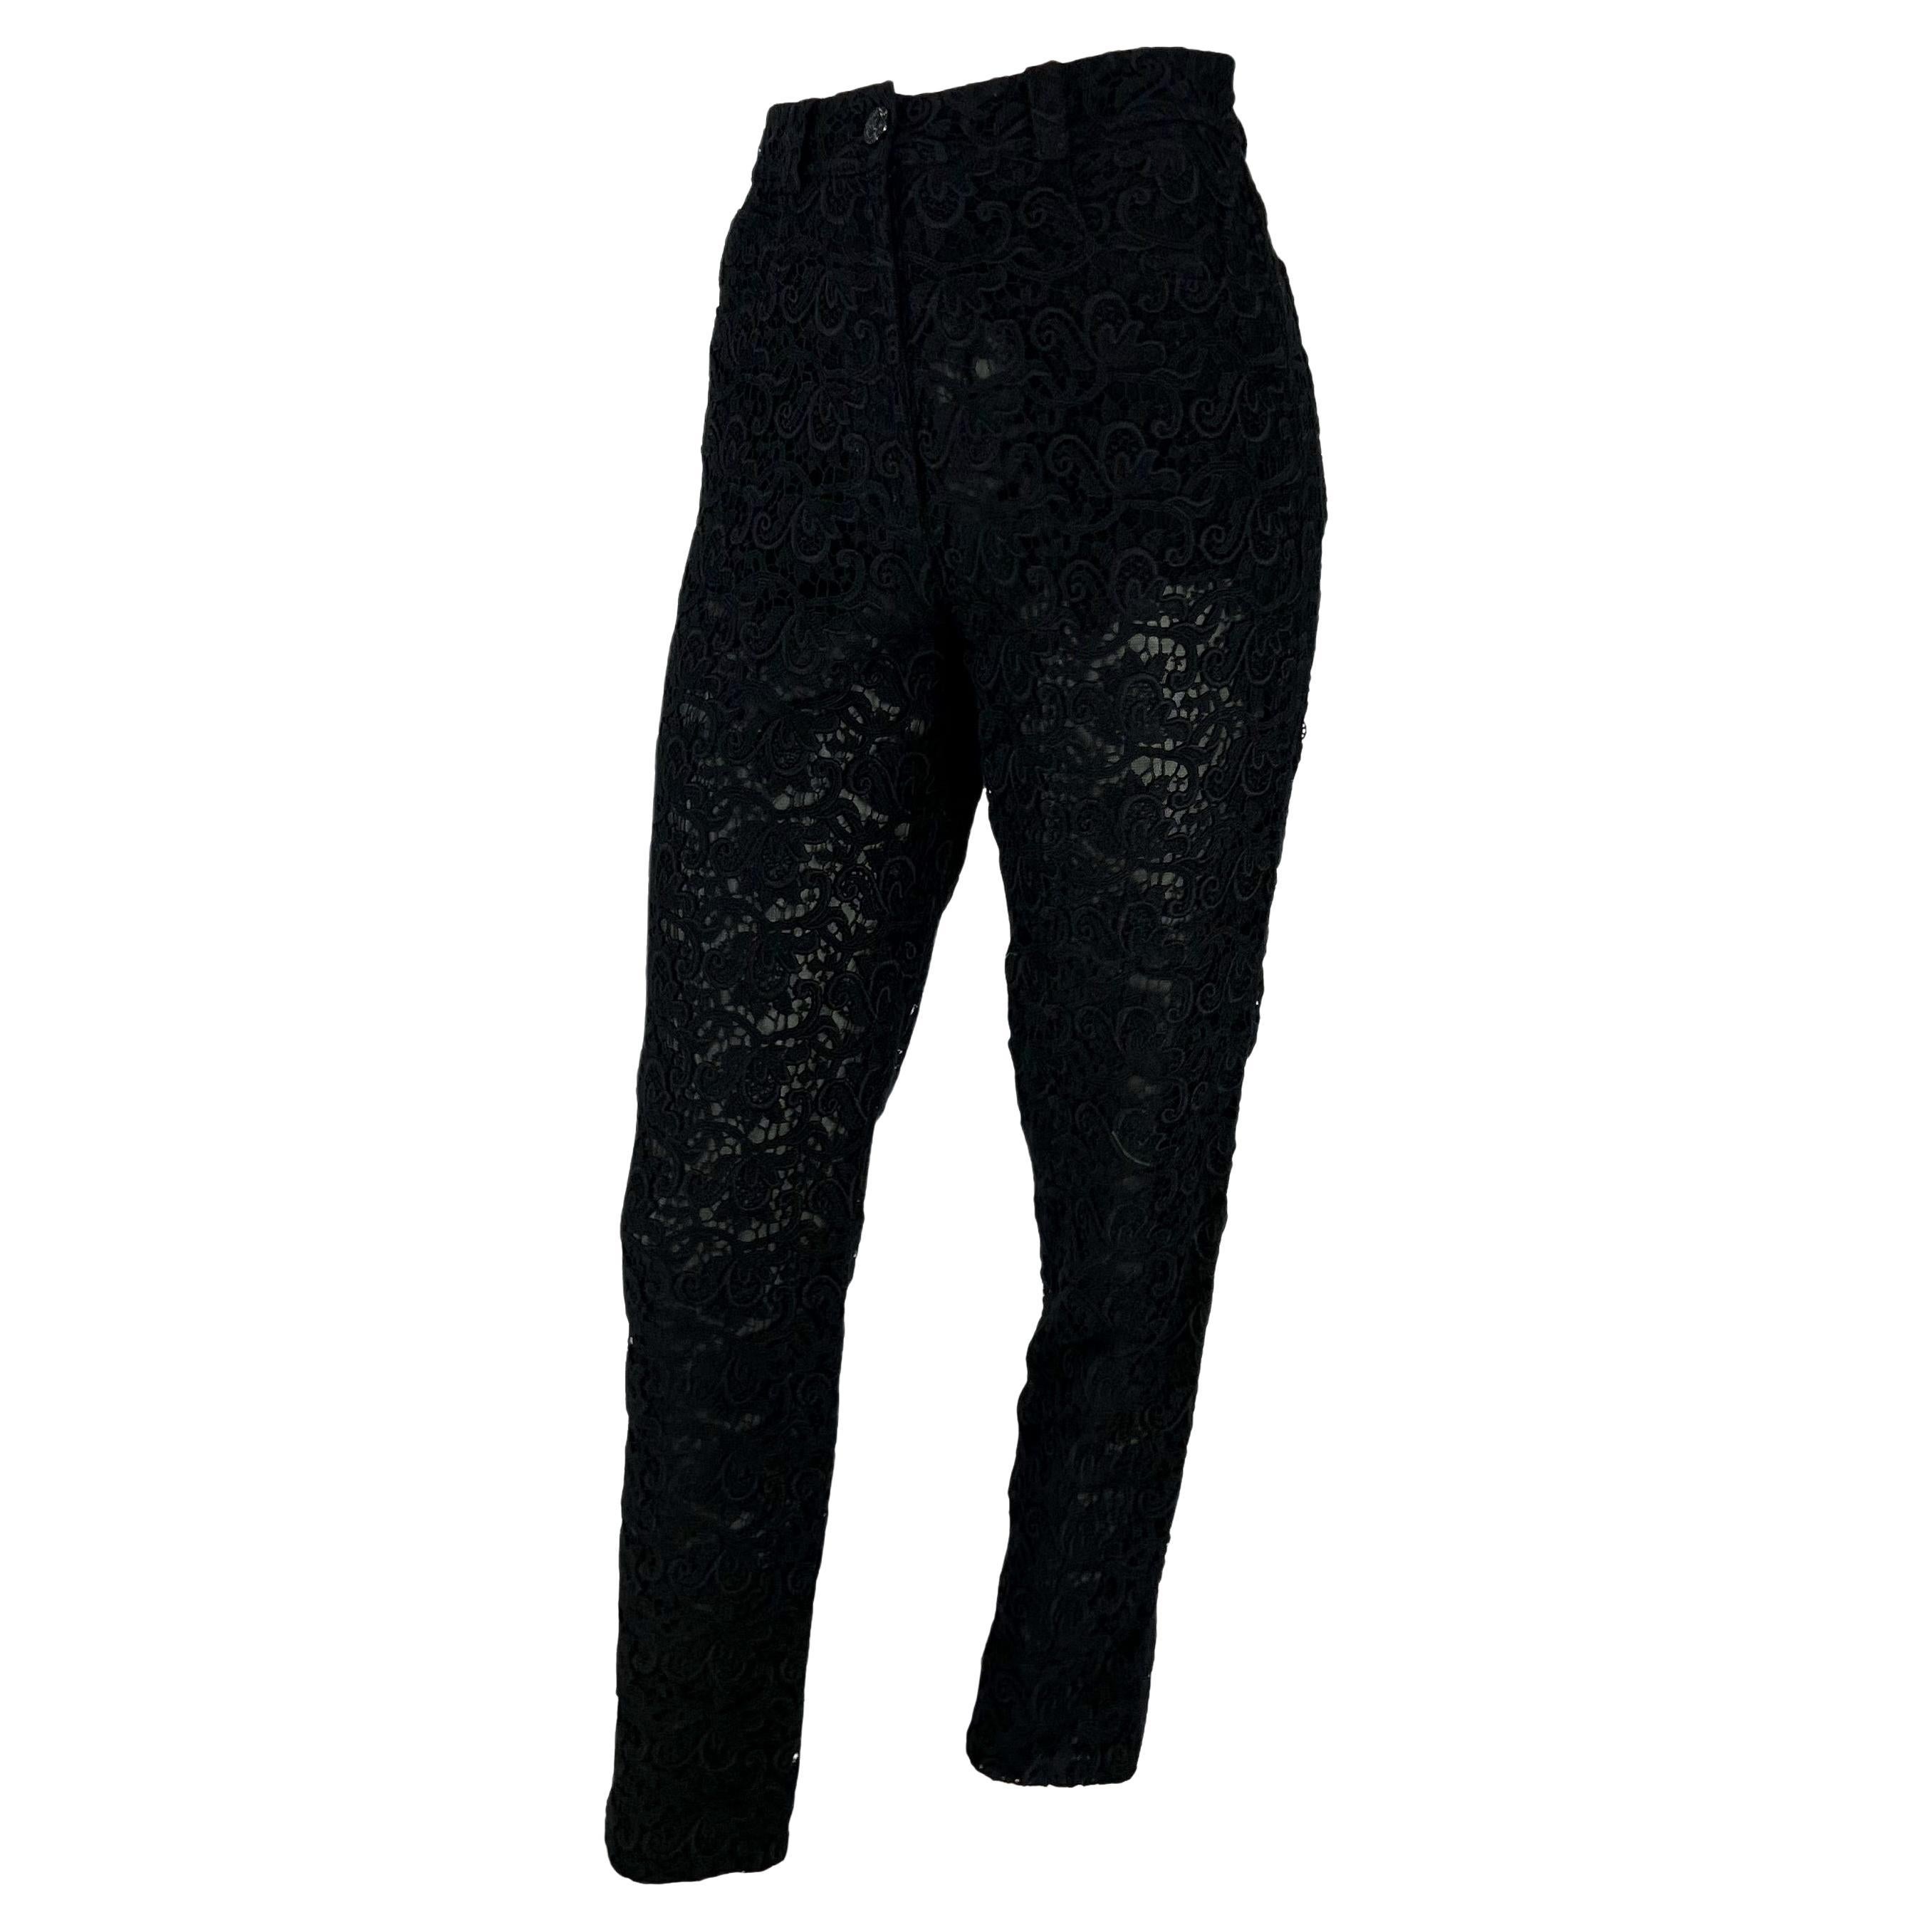 Presenting a pair of black lace Gianni Versace Couture pants, designed by Gianni Versace. From the Spring/Summer 1994 collection, these pants are constructed entirely of intricate lace with a sheer black lining underneath. These pants are made